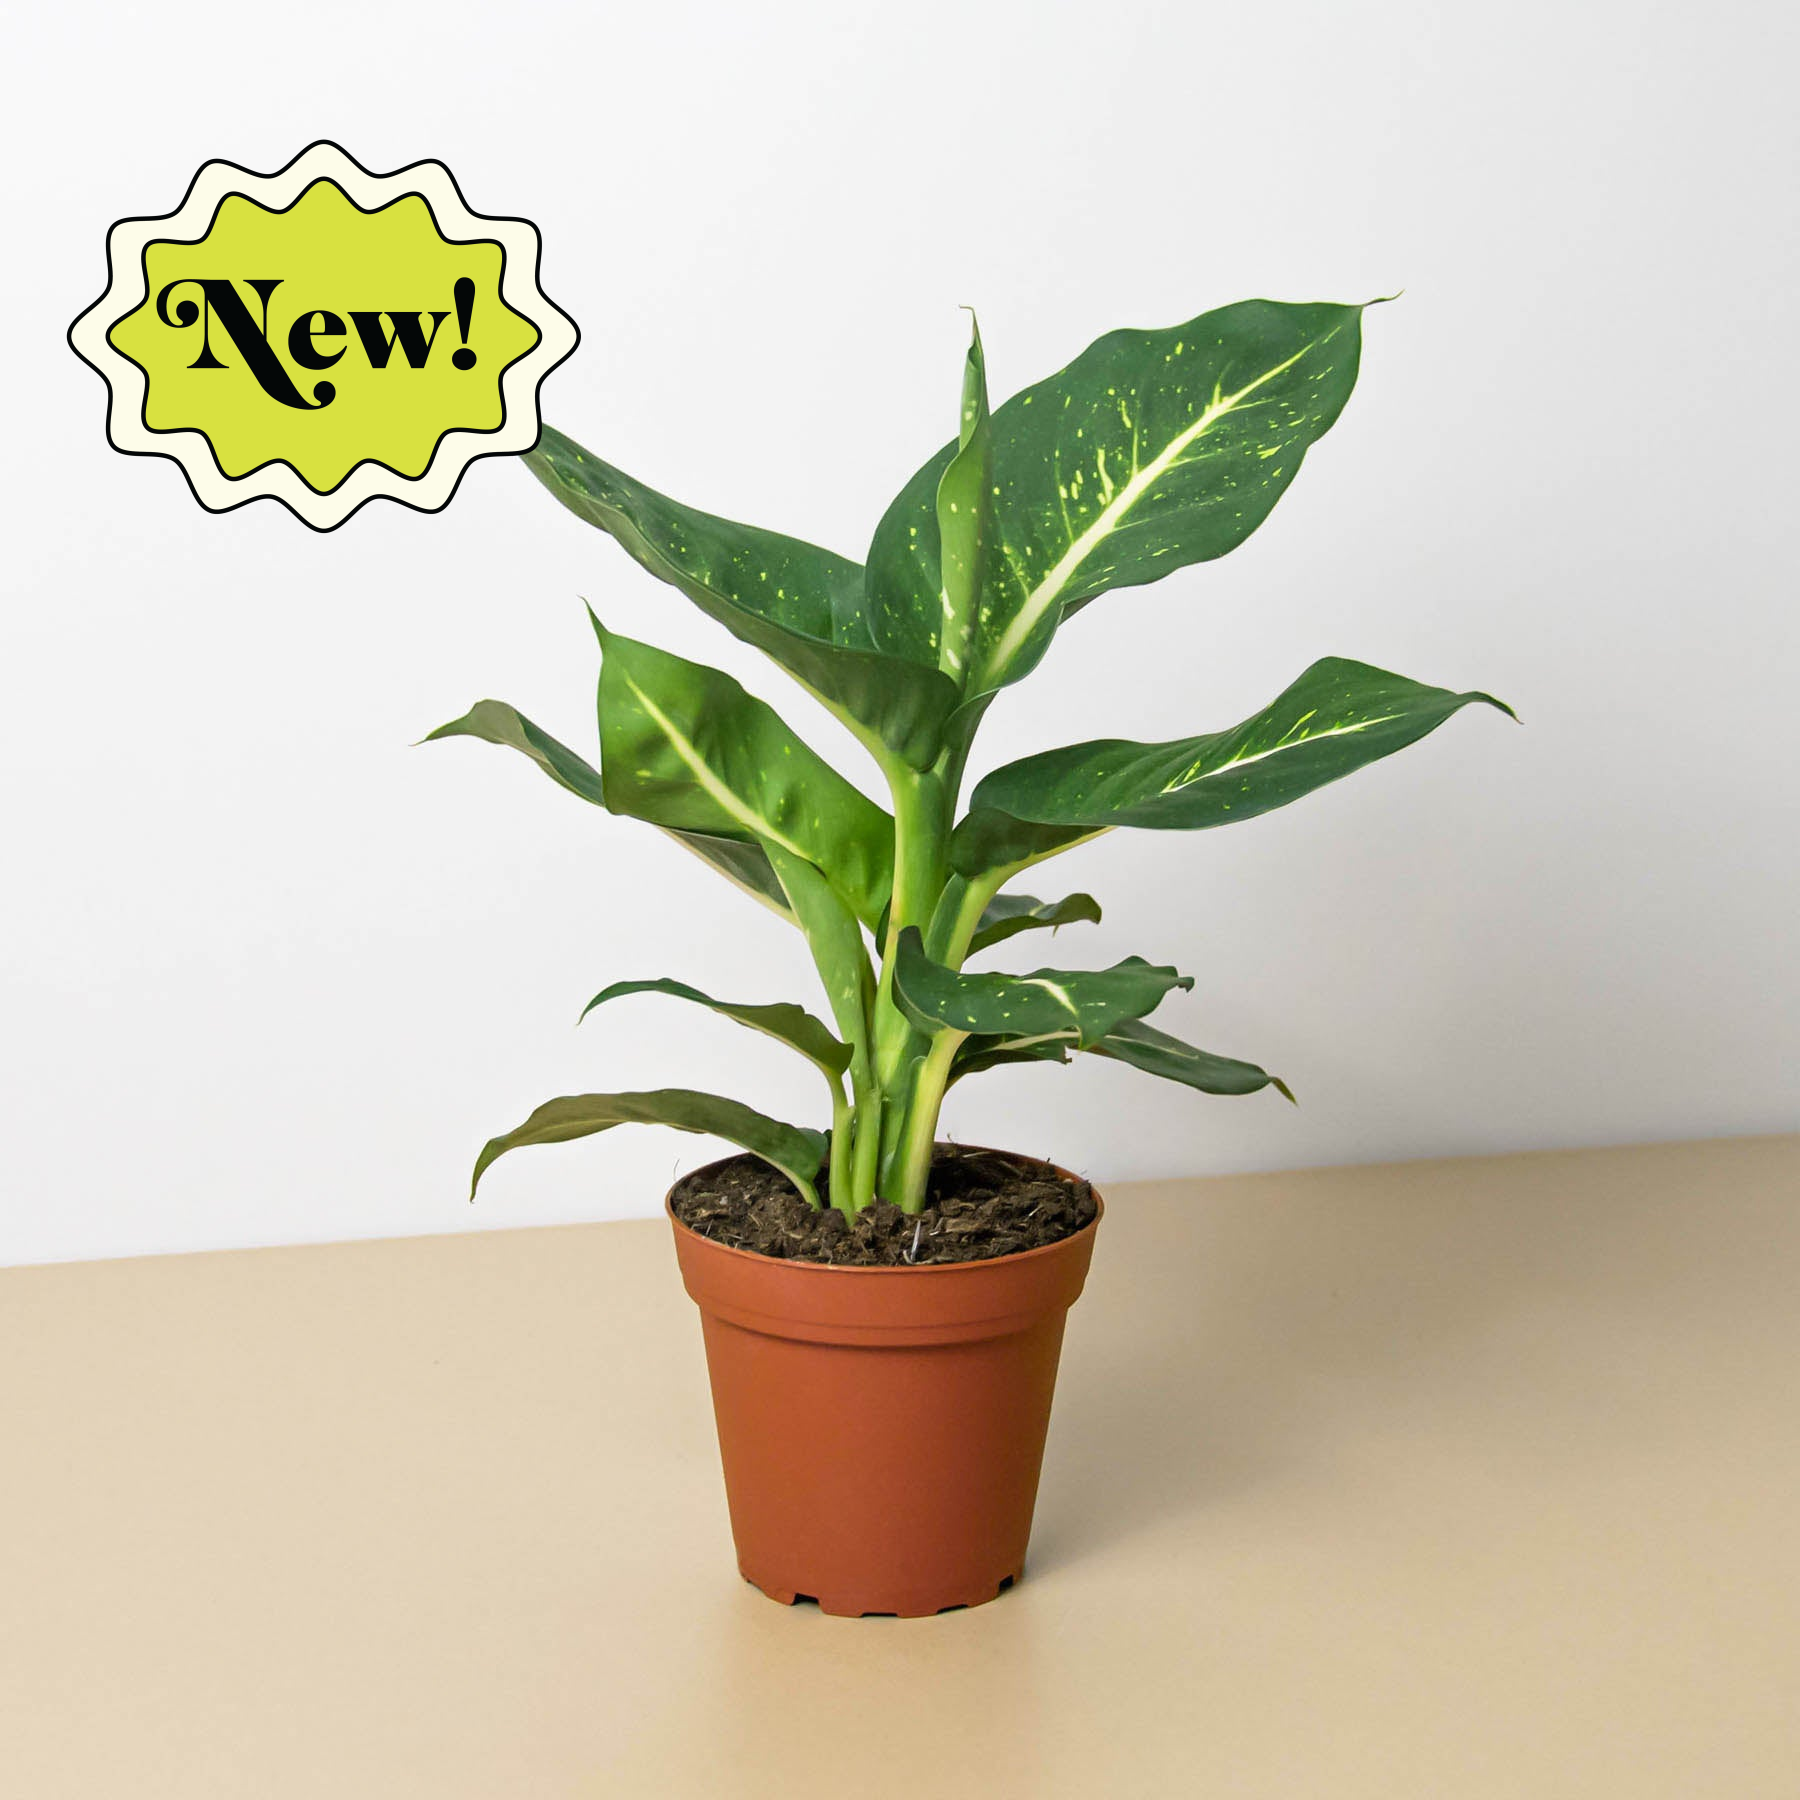 A potted plant with the word 